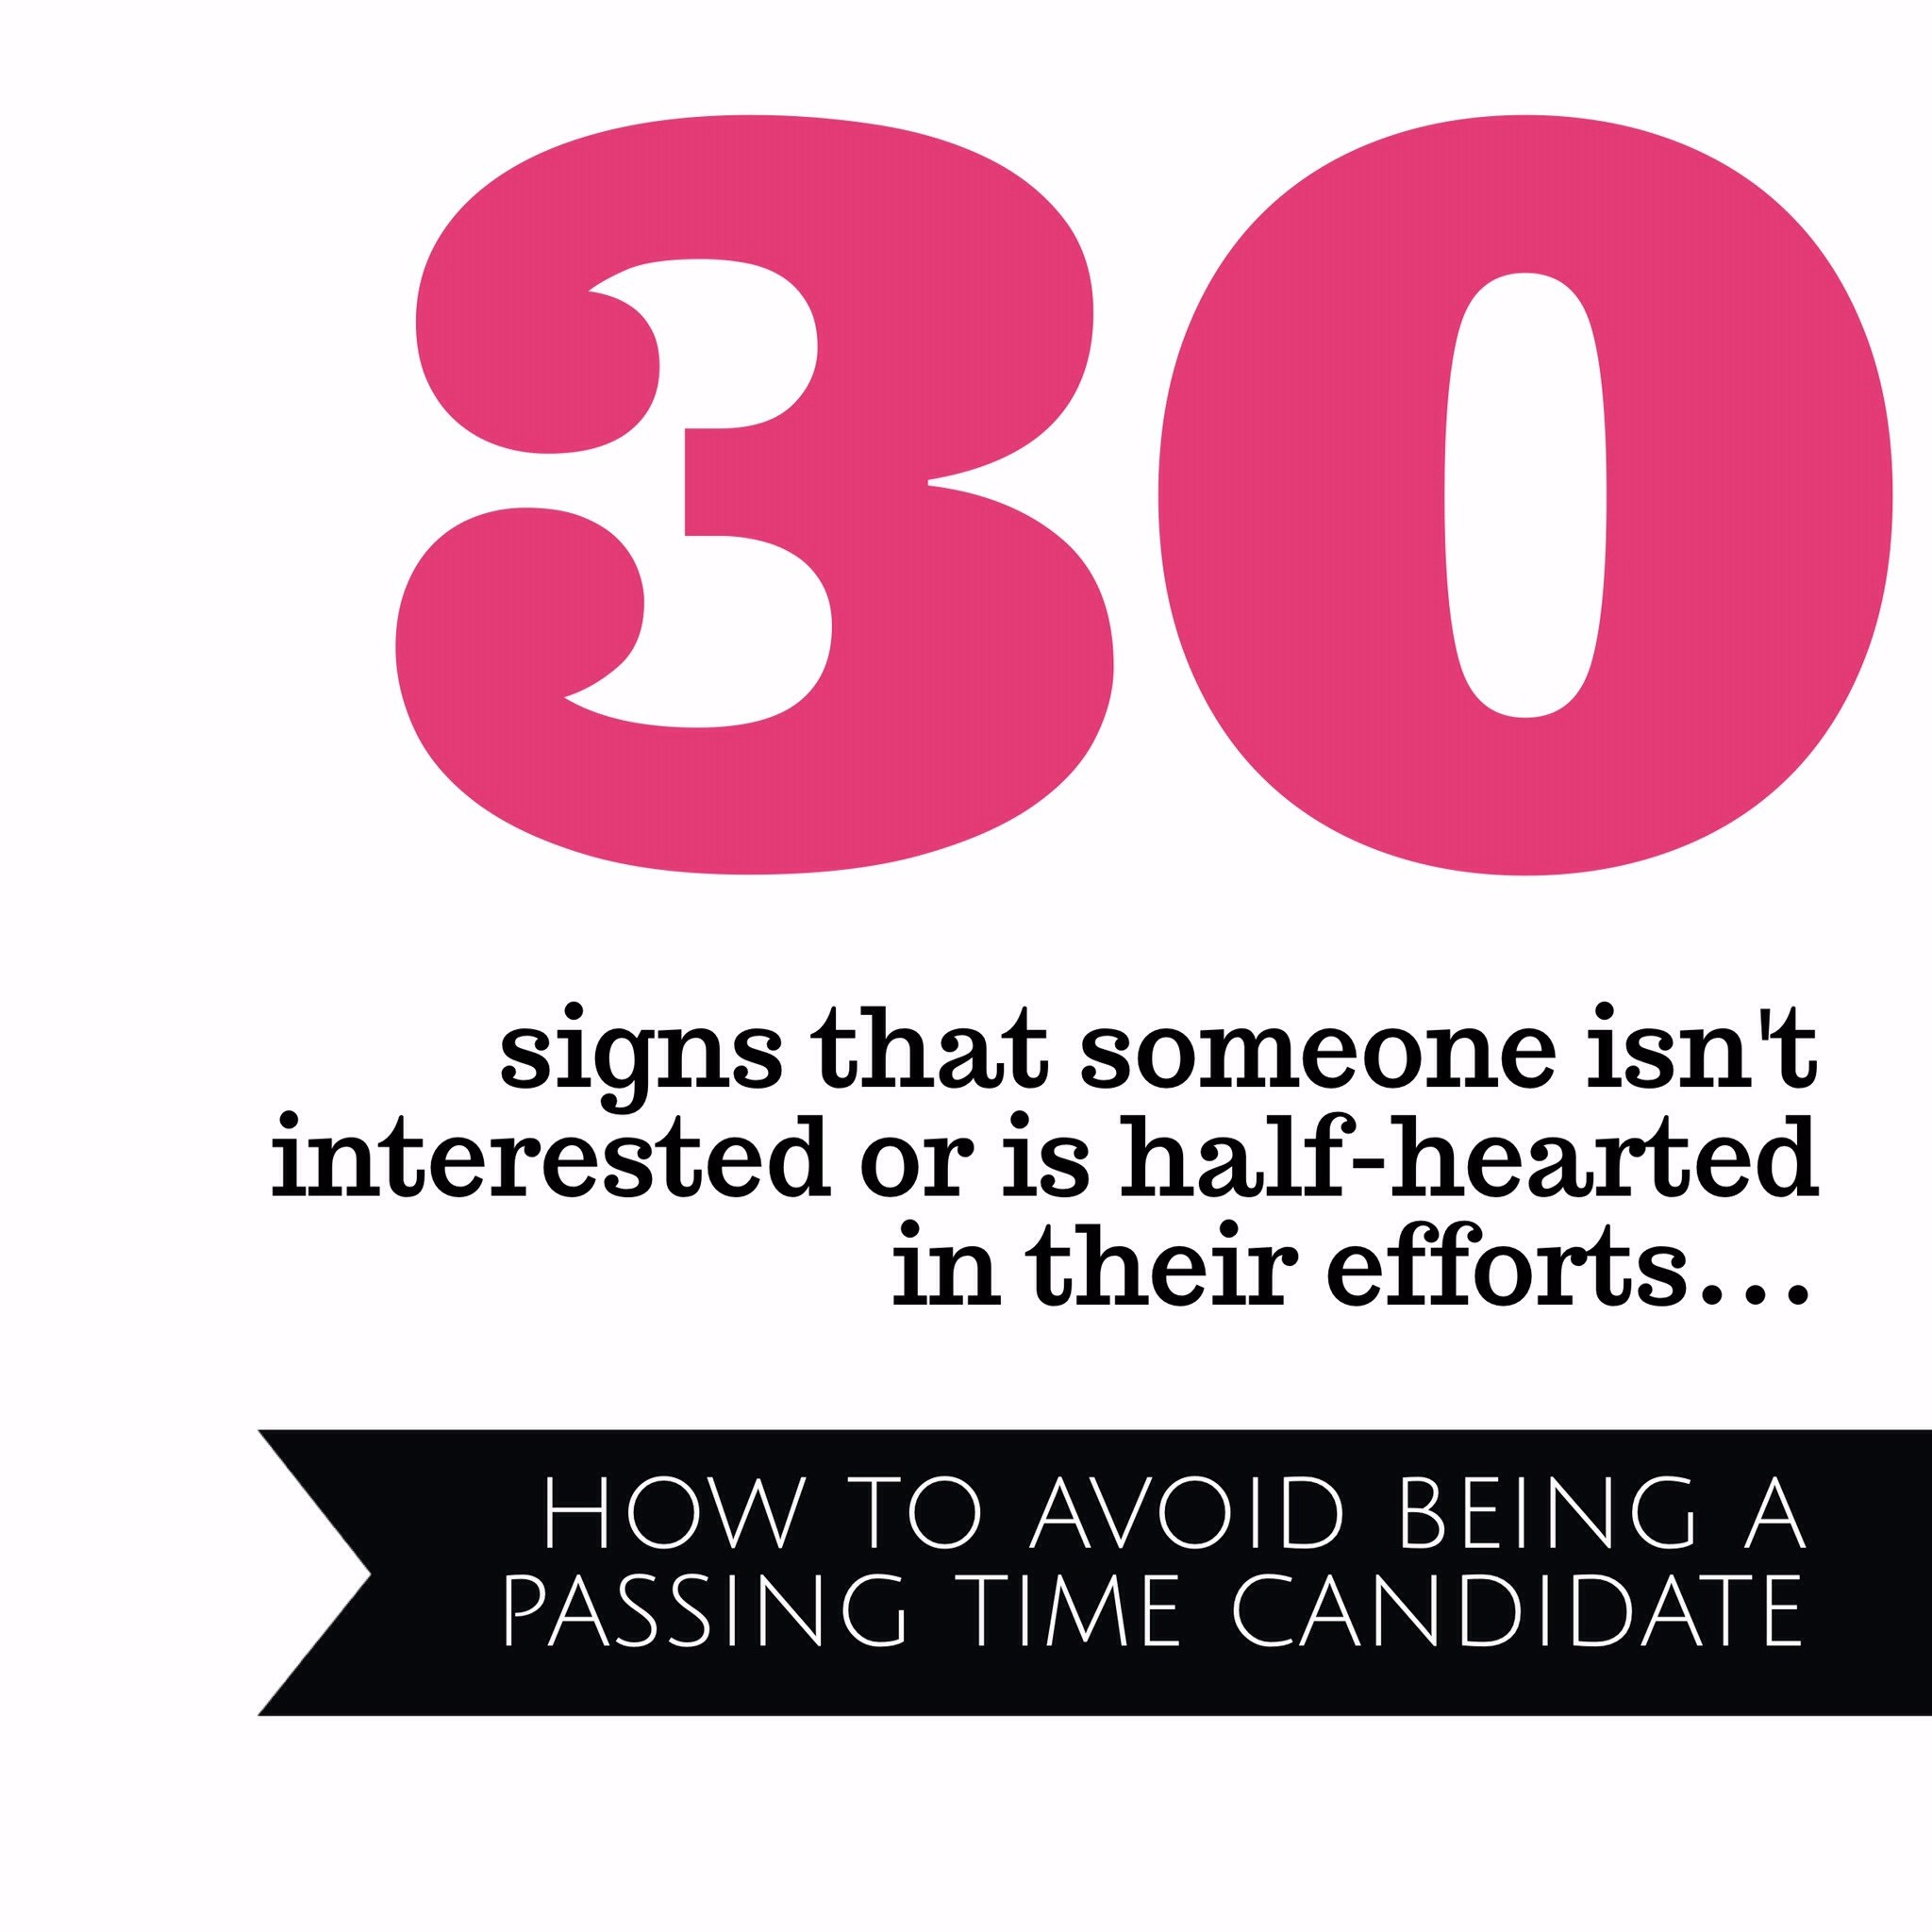 30 Signs That Someone Isn’t Interested Or Is Half-Heartedly Interested In You: How To Avoid Being a Passing Time Candidate